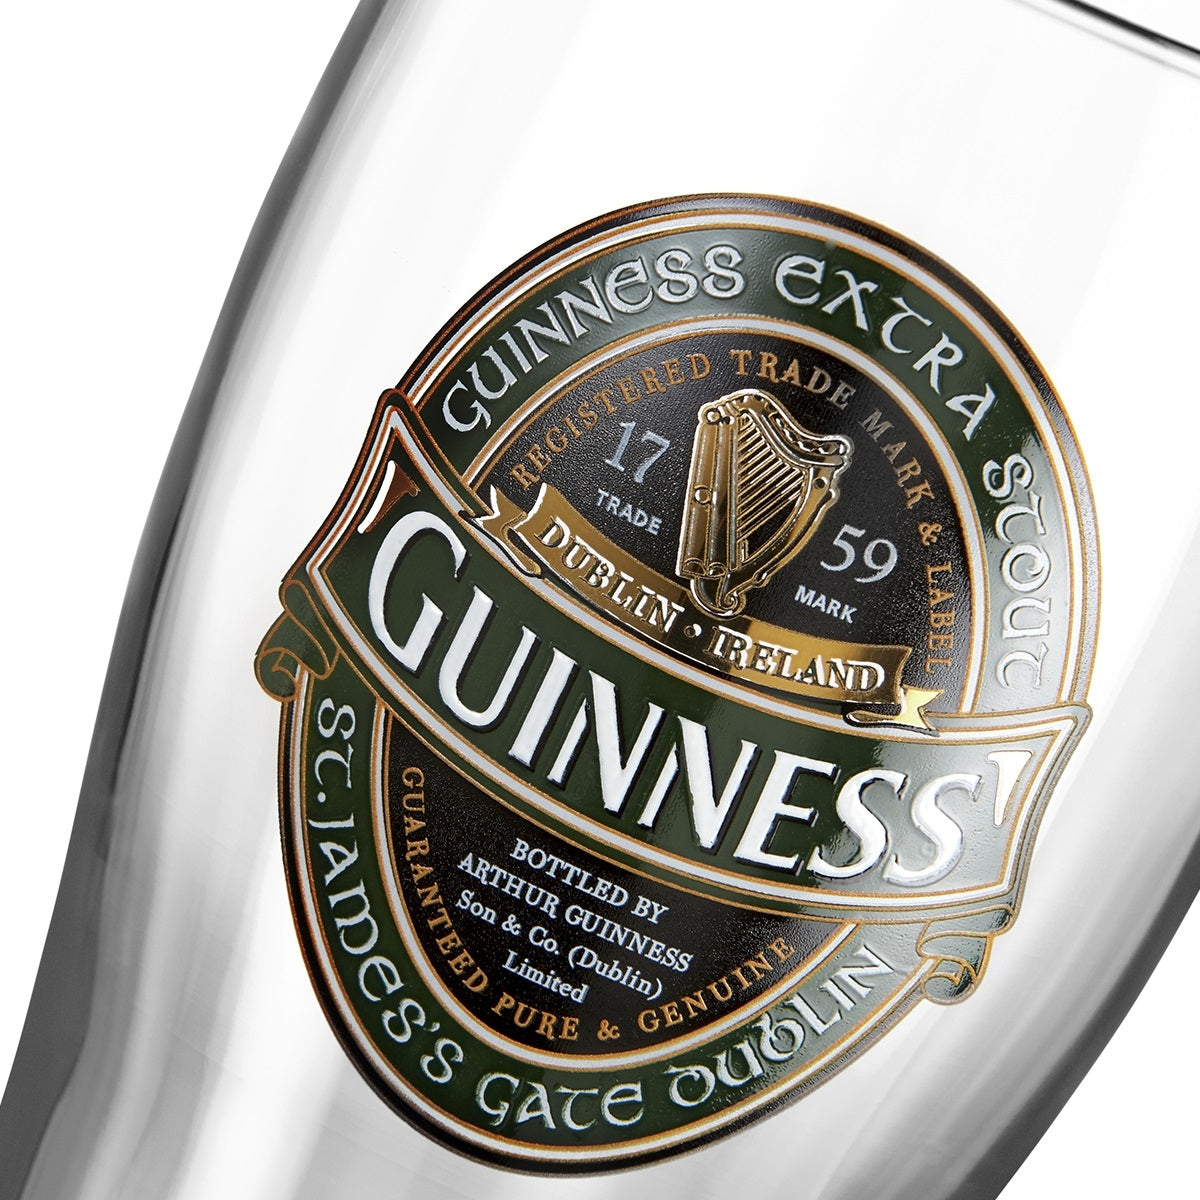 Guinness Ireland Collection Pint Glass 12 Pack